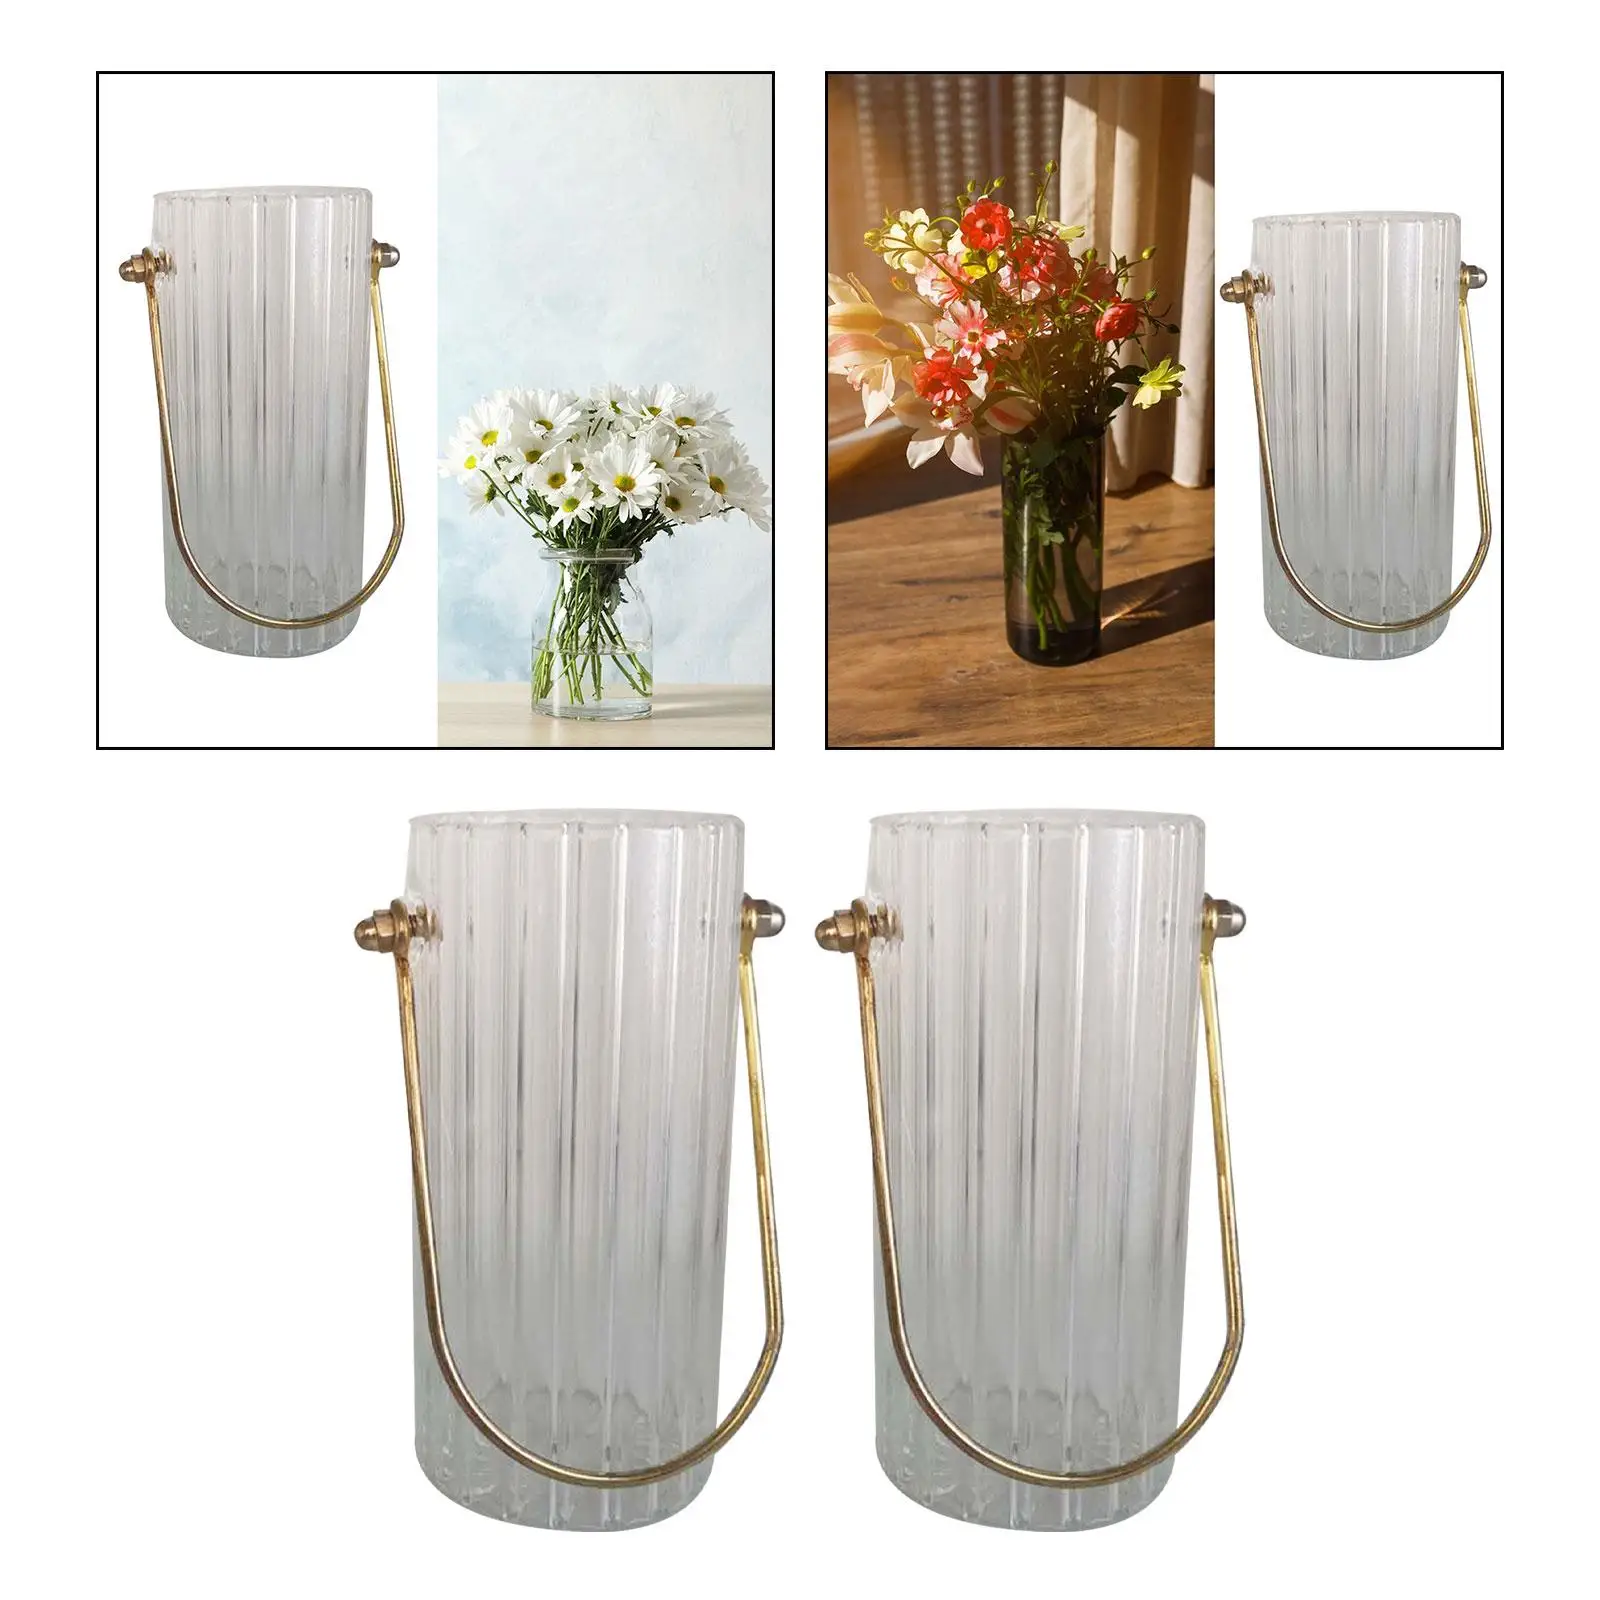 Clear Cylinder Glass Flower Vase with Metal Handle Sturdy Round Thickened Hand Blow for Indoor Office Desk,Bathroom Multipurpose